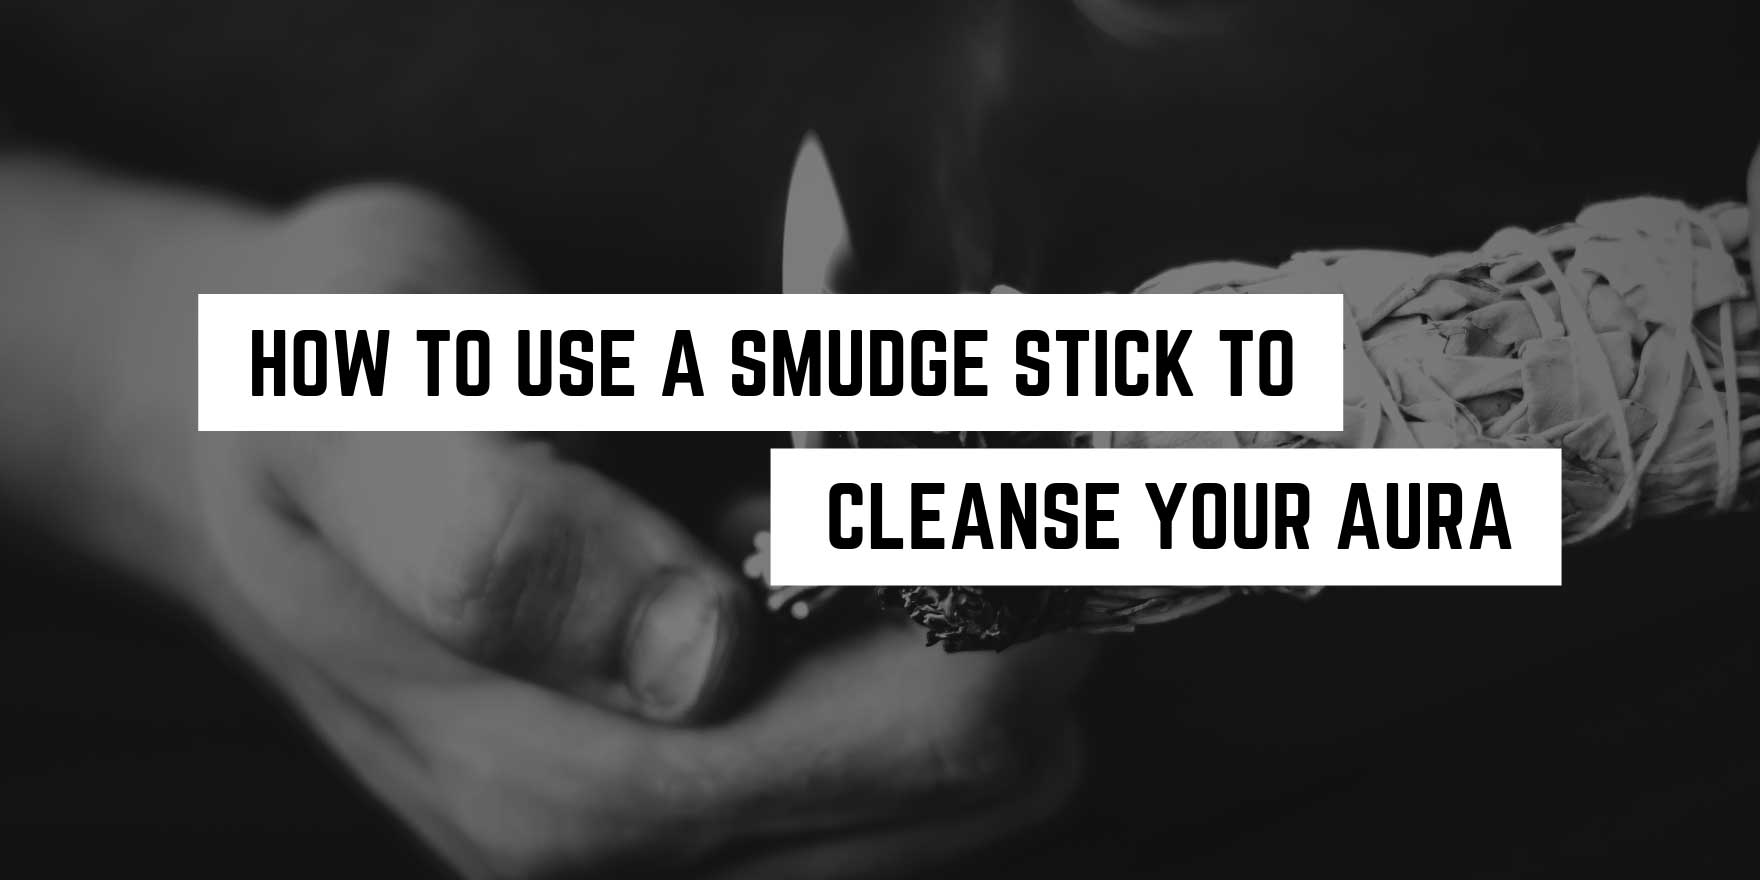 A person ignites a witchy smudge stick, with text overlay suggesting a tutorial on using it for aura cleansing.